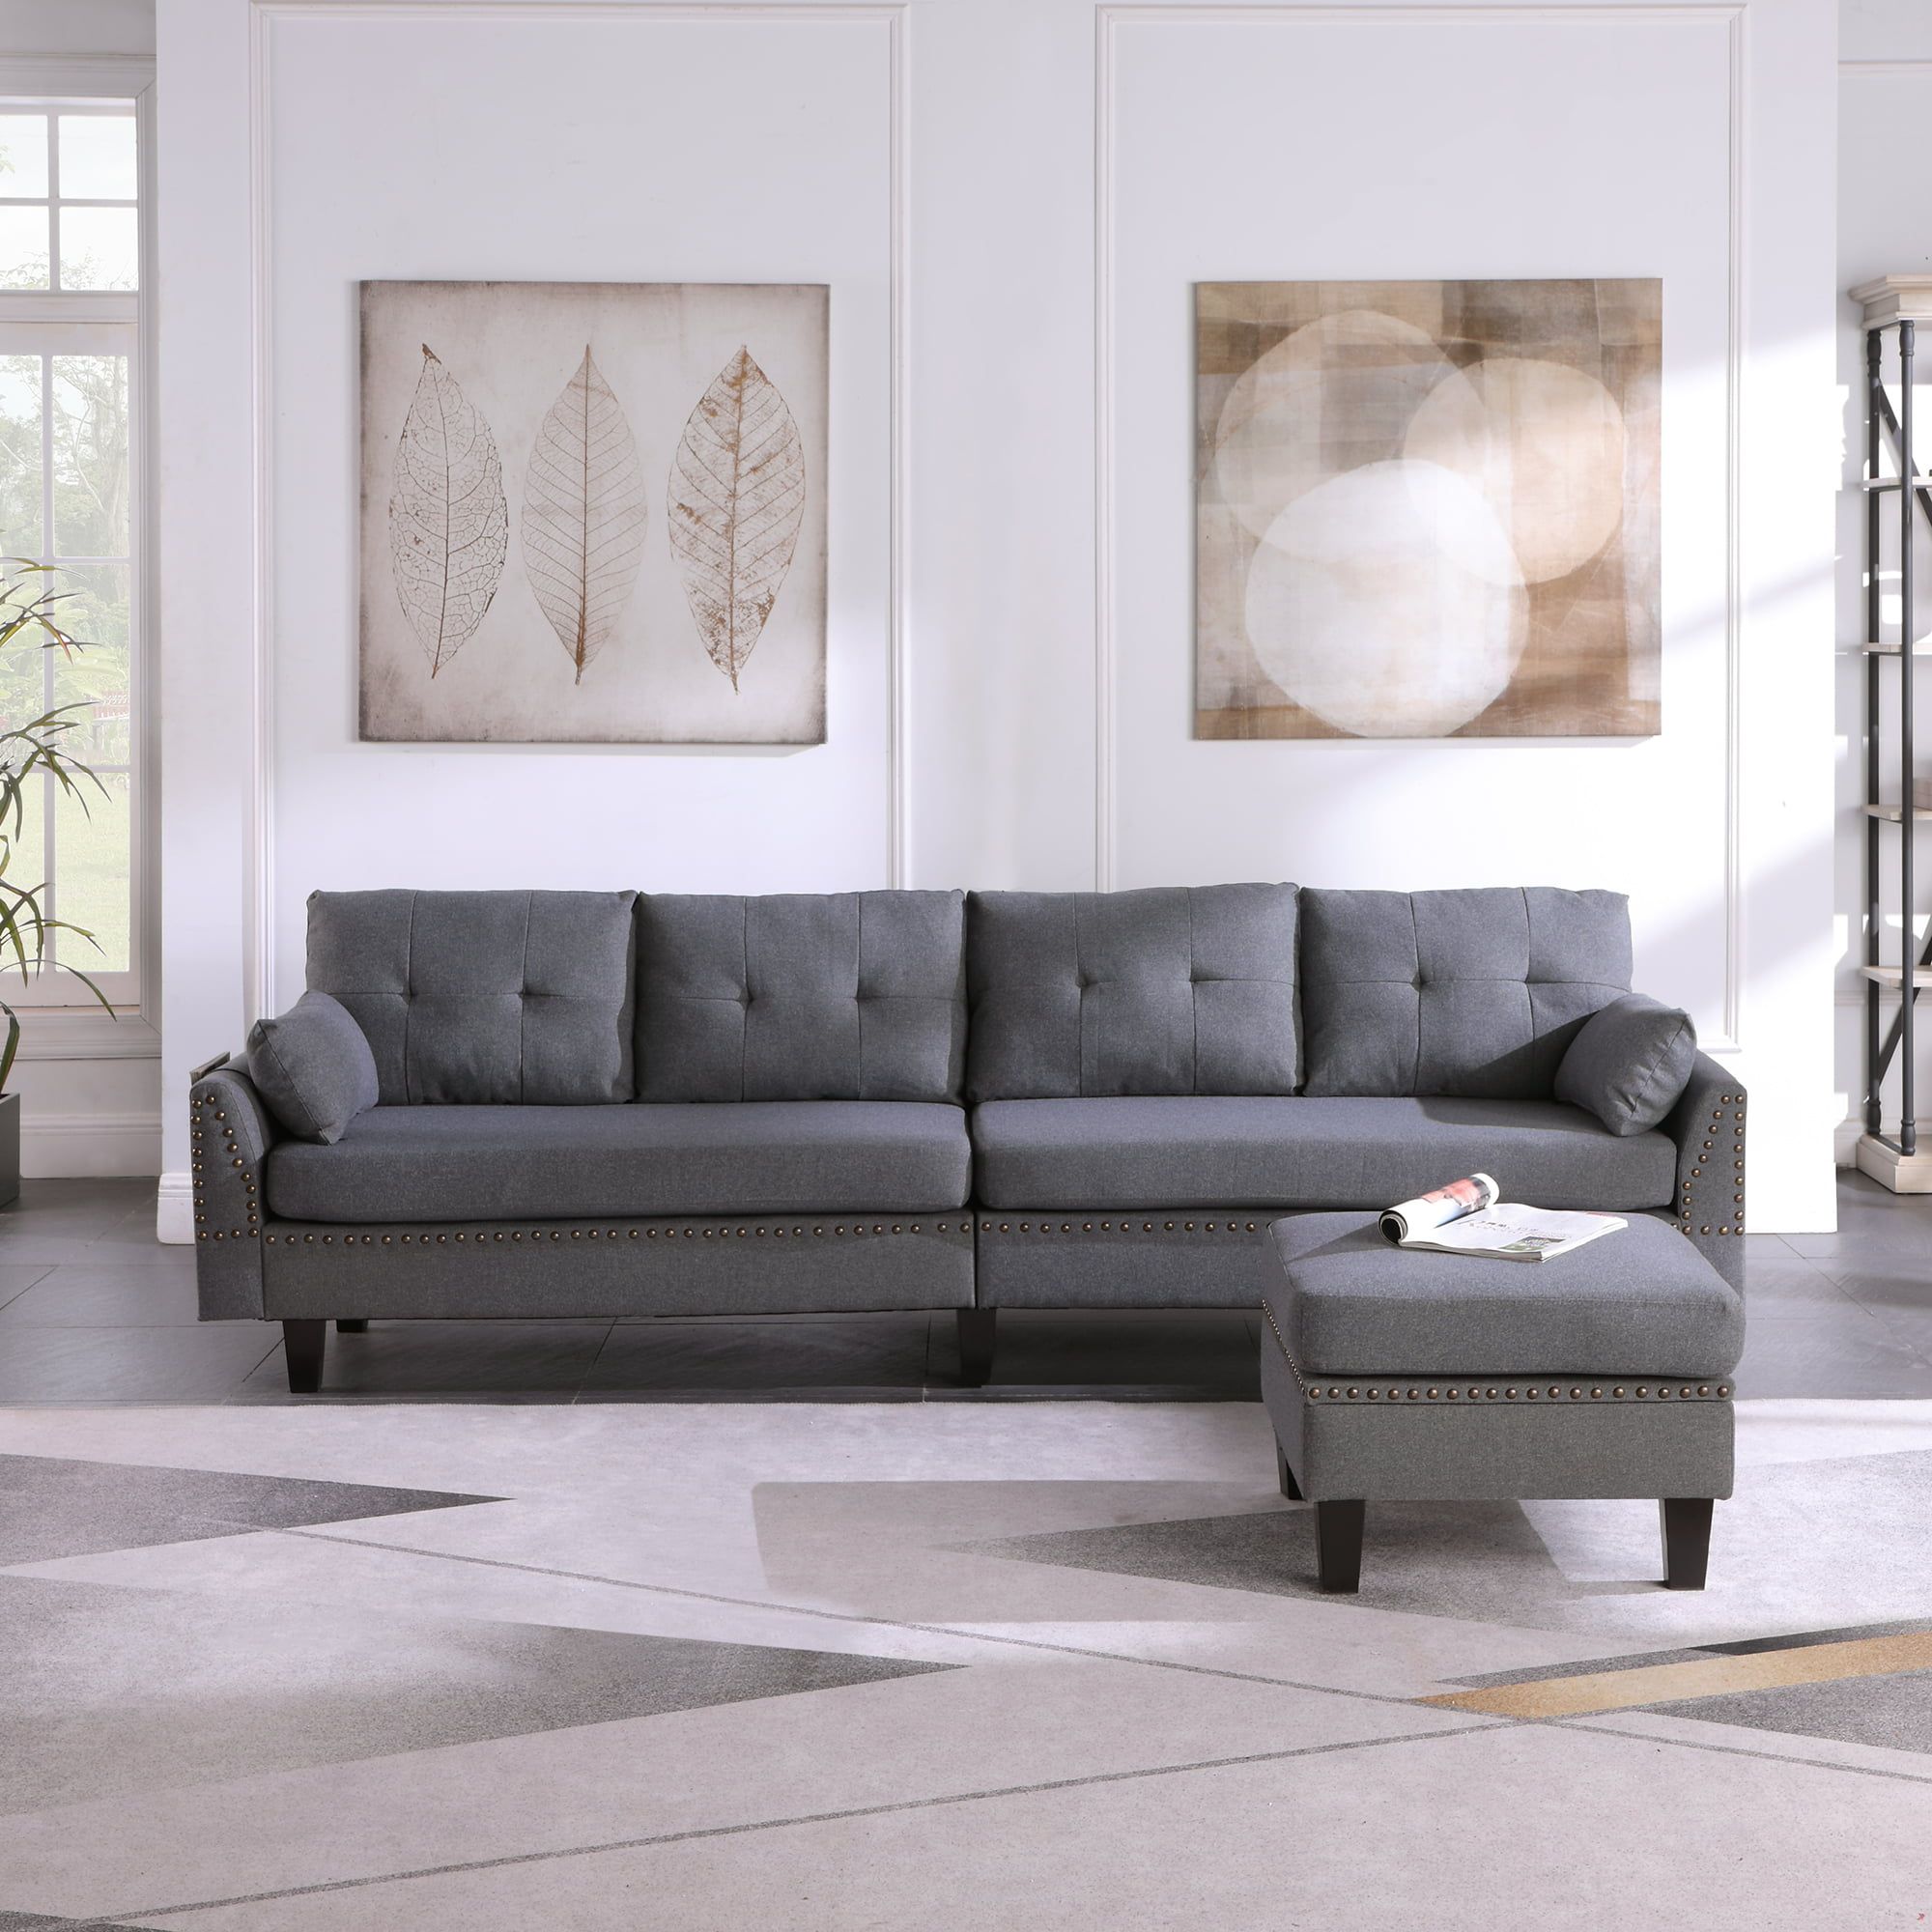 Urhomepro Mid Century Couches And Sofas With Ottoman, 2 Pillows, Modern Within Sofas With Ottomans (View 19 of 20)